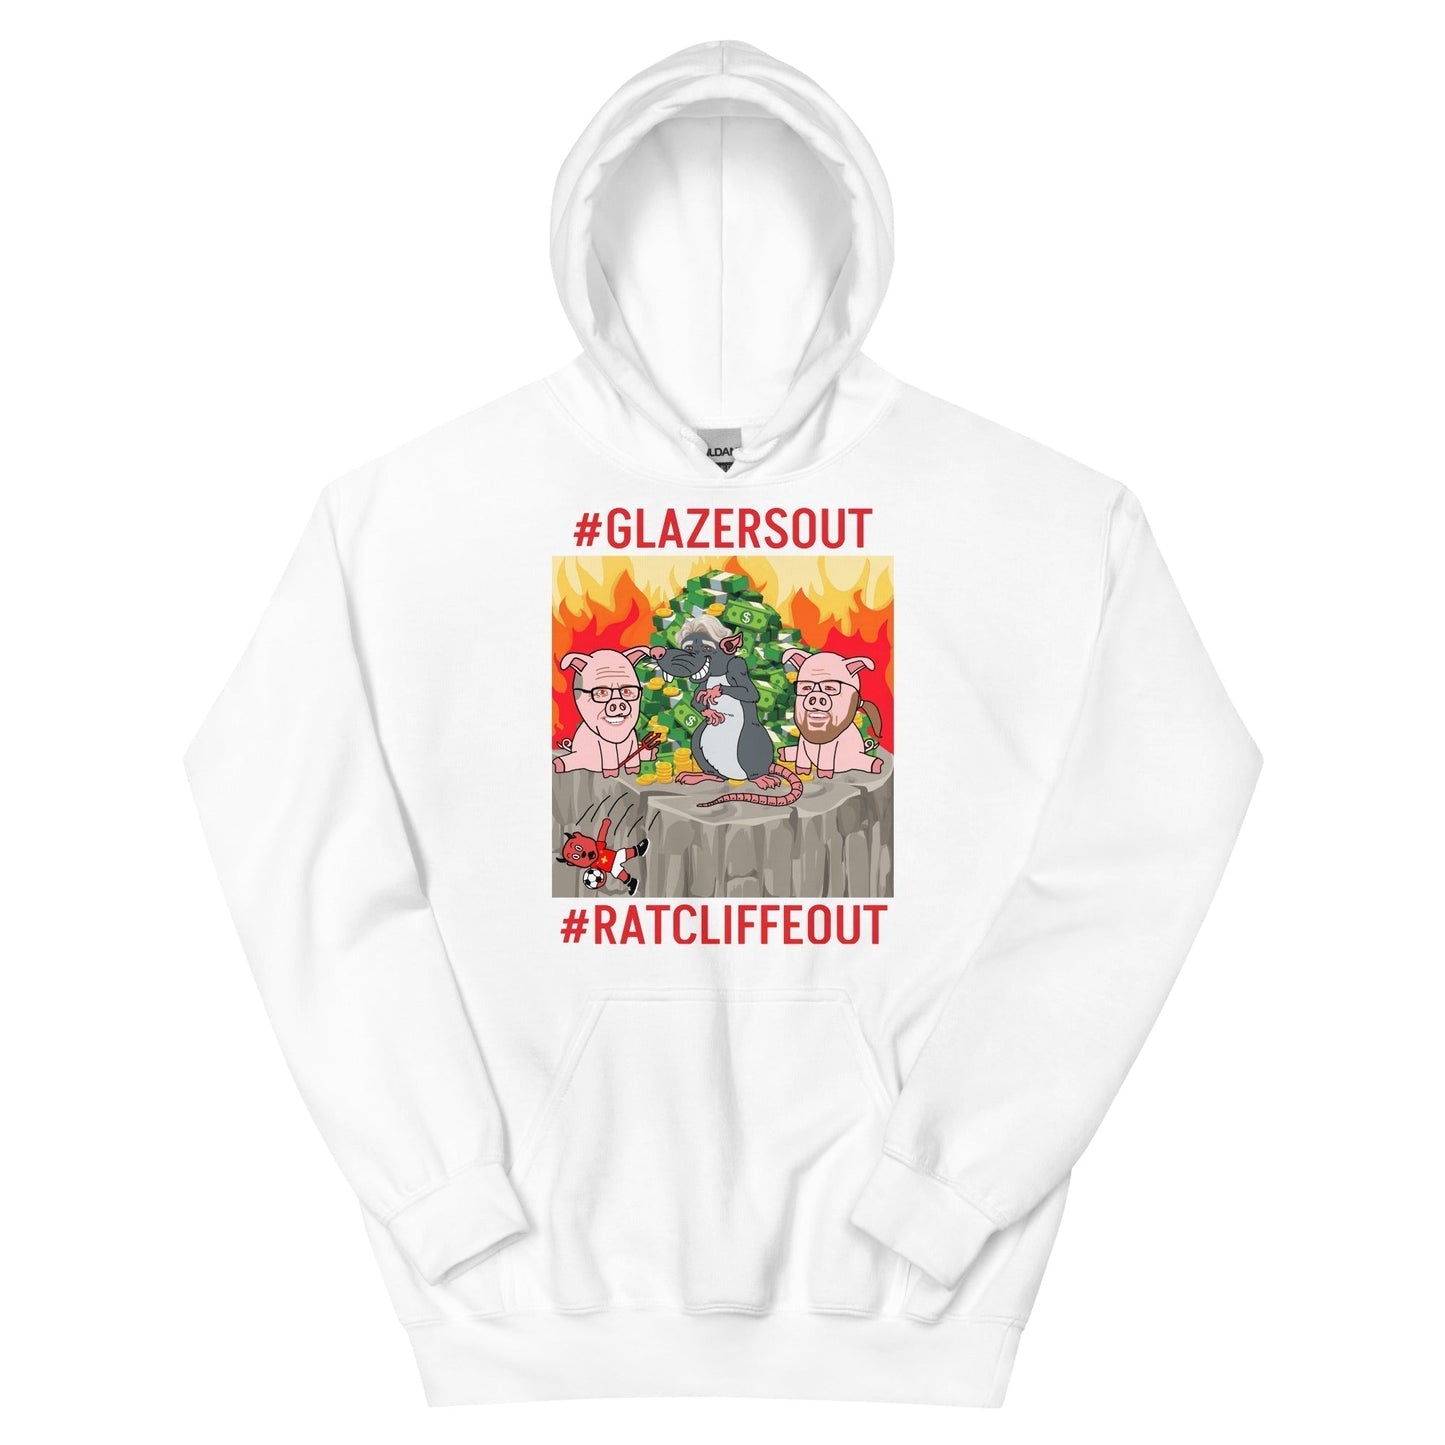 Manchester United Ratcliffe Out, Glazers Out Unisex Hoodie, Red Letters, #GlazersOut #RatcliffeOut Next Cult Brand Football, GlazersOut, Manchester United, RatcliffeOut